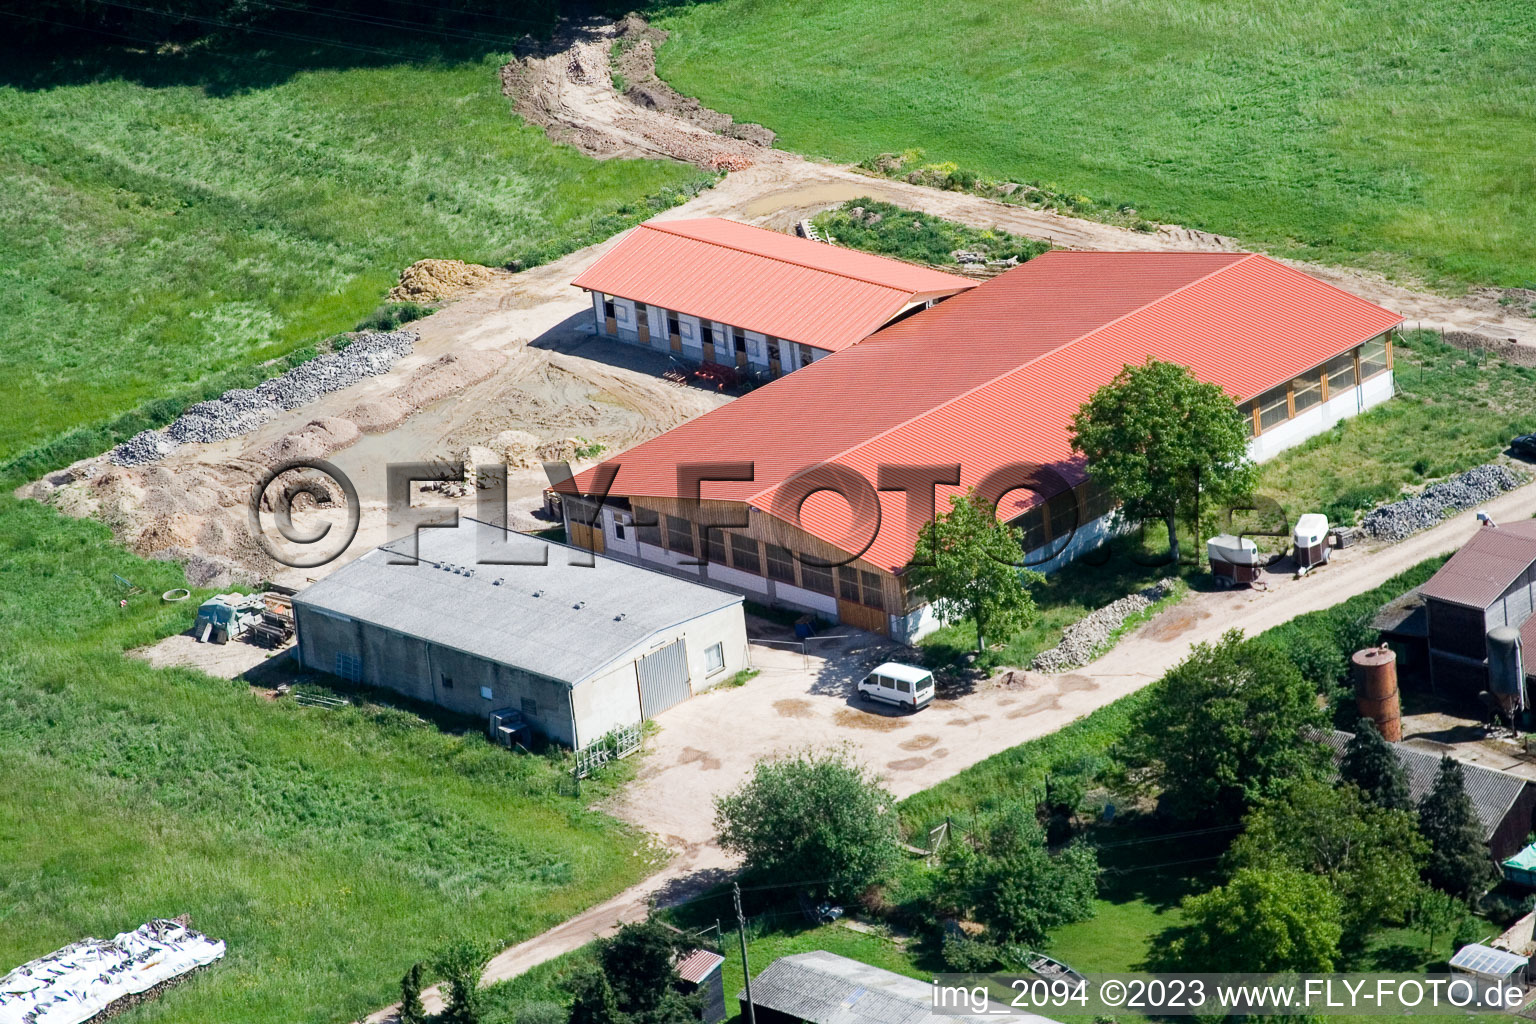 Horse farm in the district Minderslachen in Kandel in the state Rhineland-Palatinate, Germany